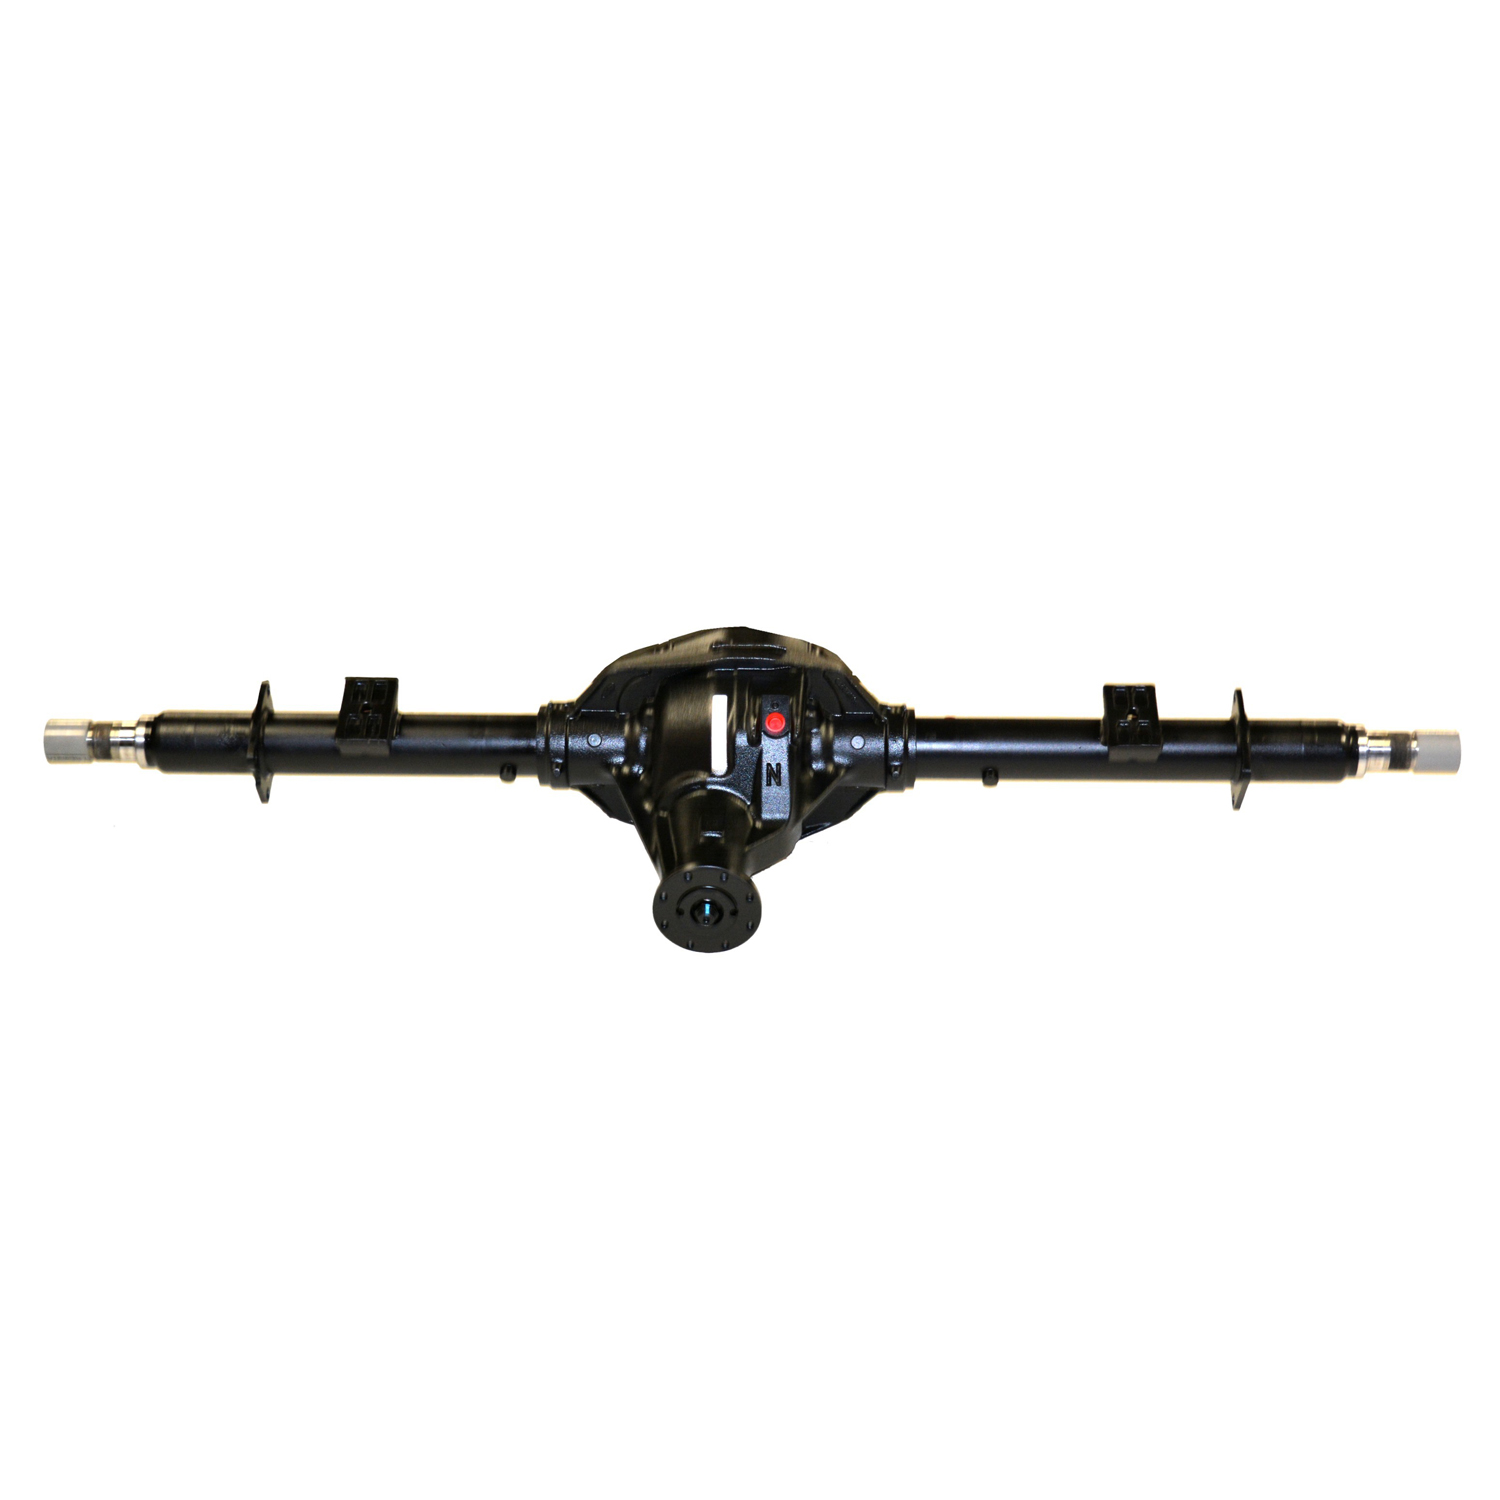 Remanufactured Axle Assy for 10.25" 87-97 F350 4.11 , DRW, ABS, Cab & Chassis, Posi LSD